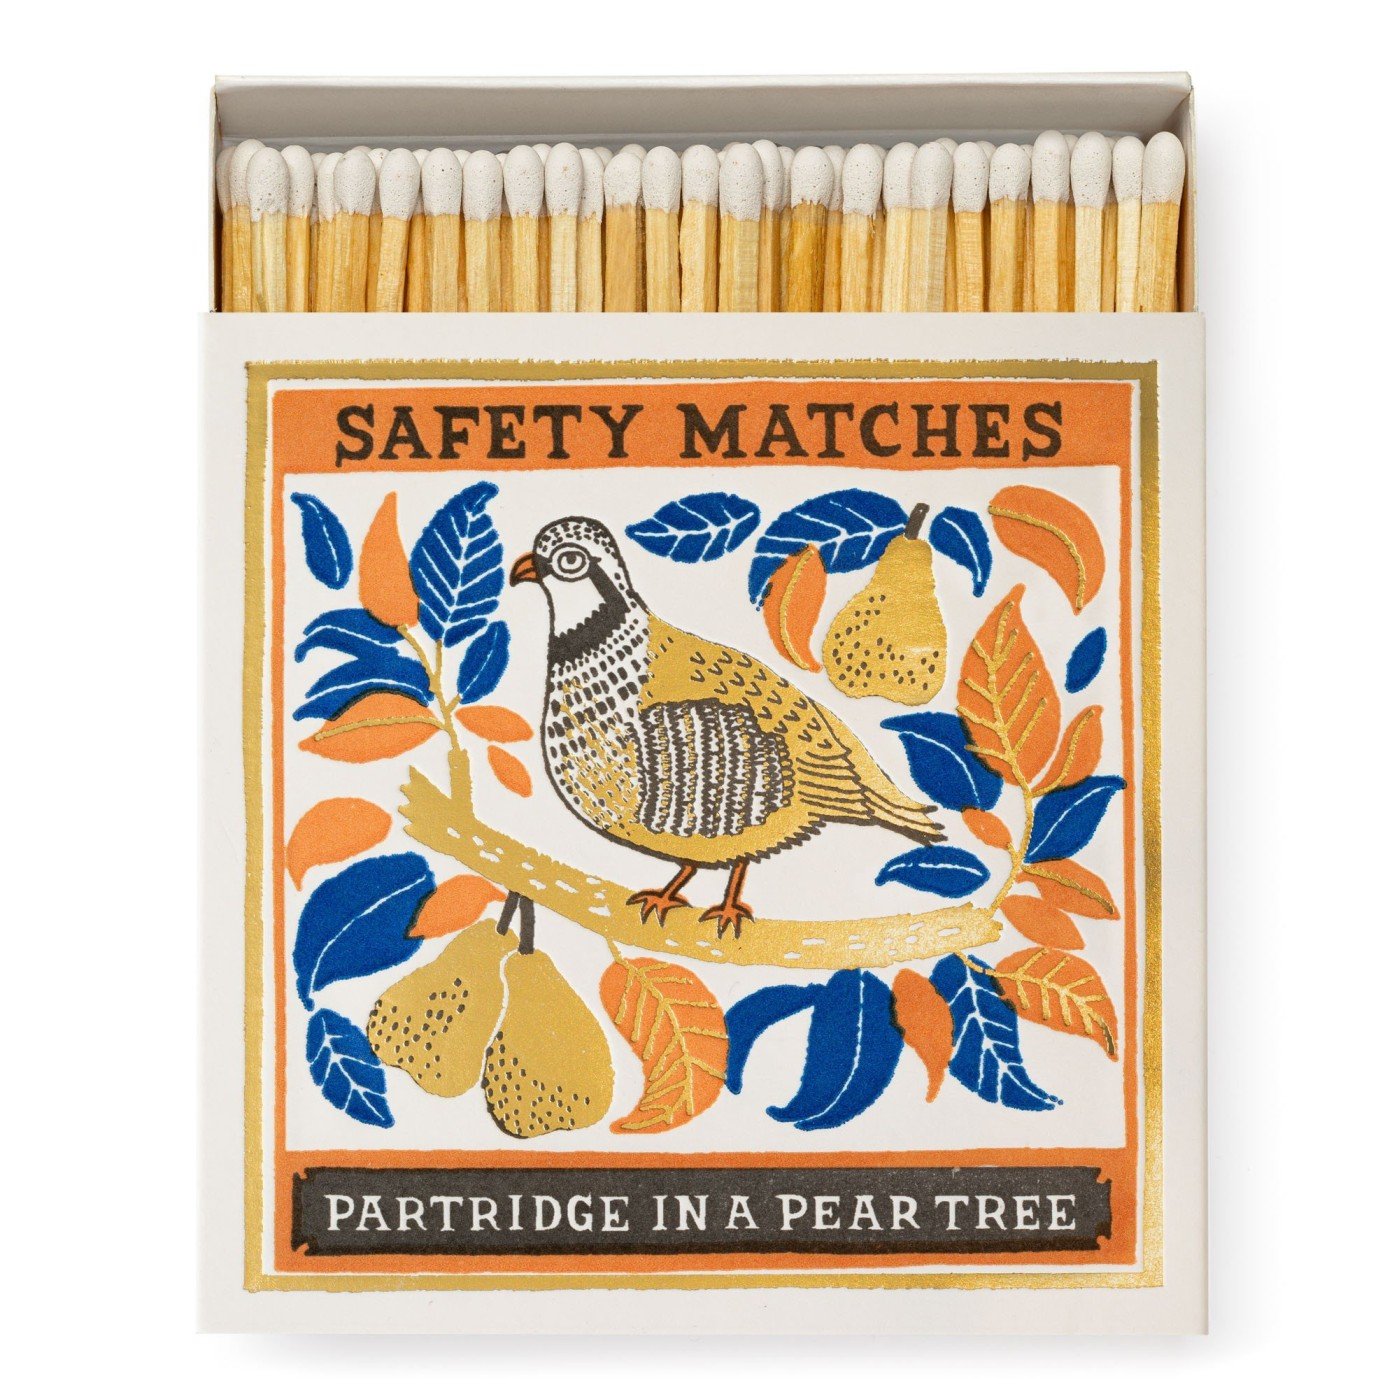 Archivist Luxury Matches - Partridge in Pear Tree